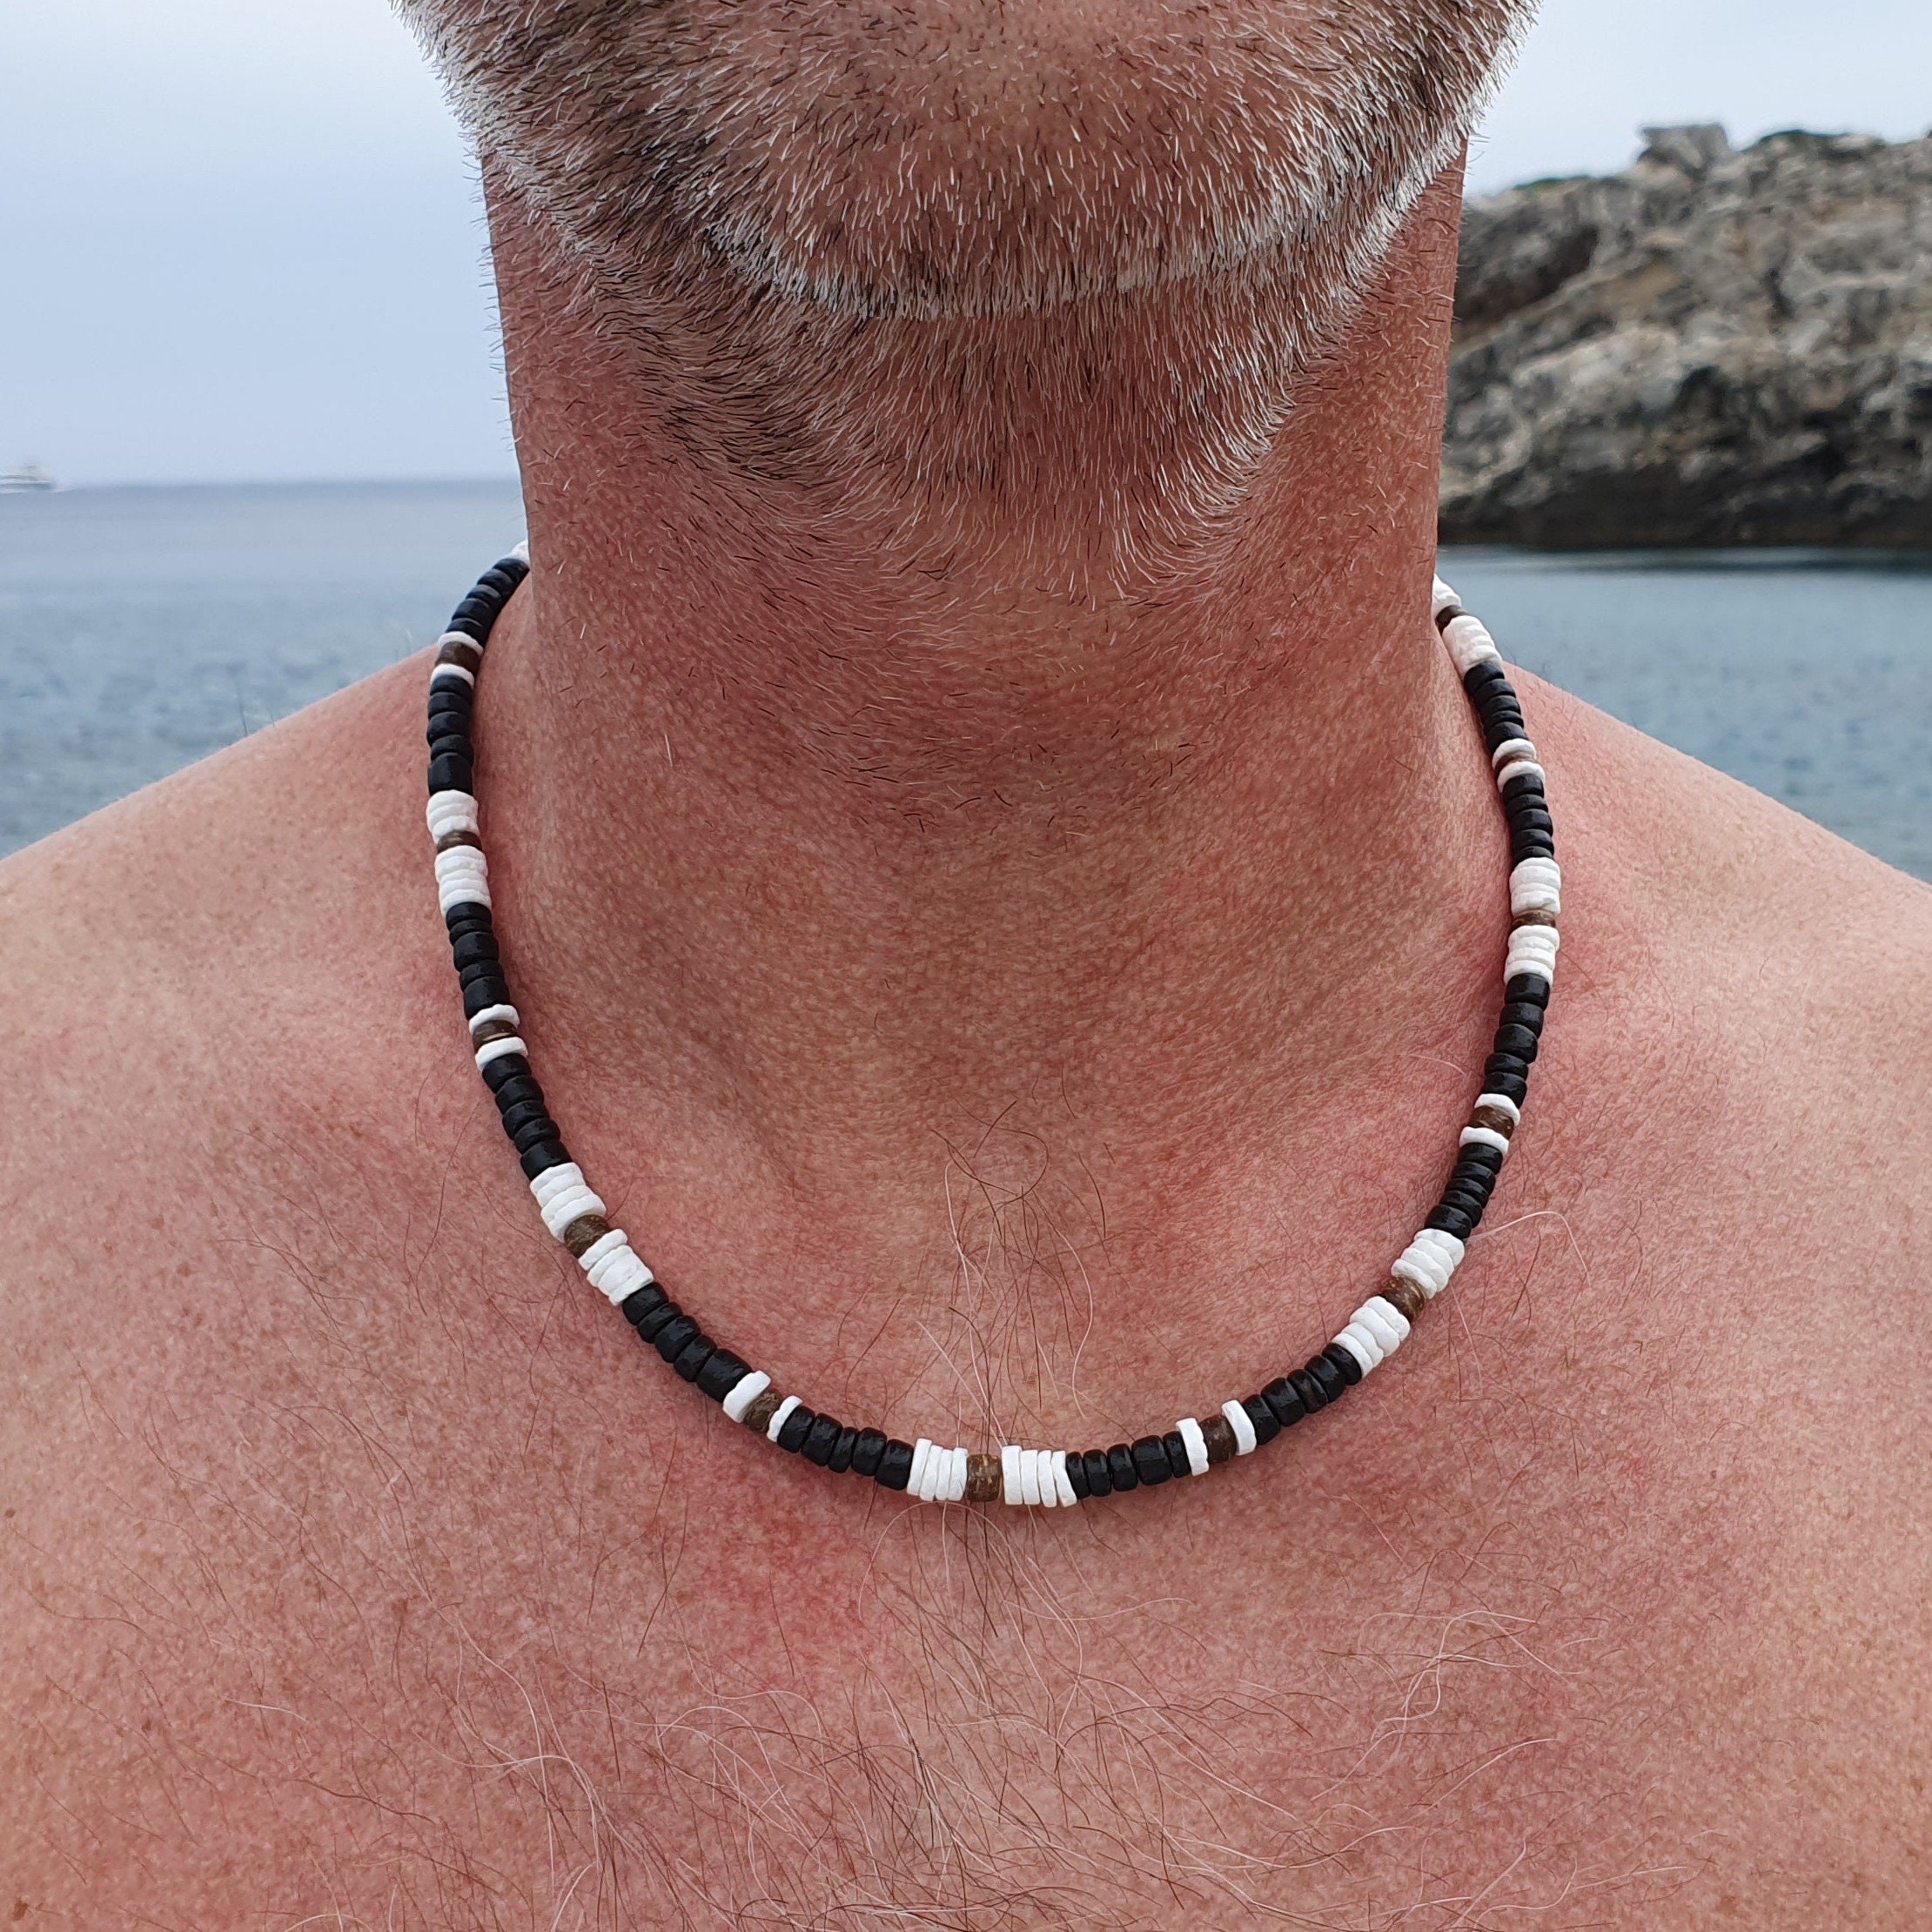 Buy Mens Coconut Necklace. Mens Beaded Necklace. Mens Necklace. Surfer  Style Necklace. Wood Bead Necklace.bohemian Mens Necklace. Online in India  - Etsy